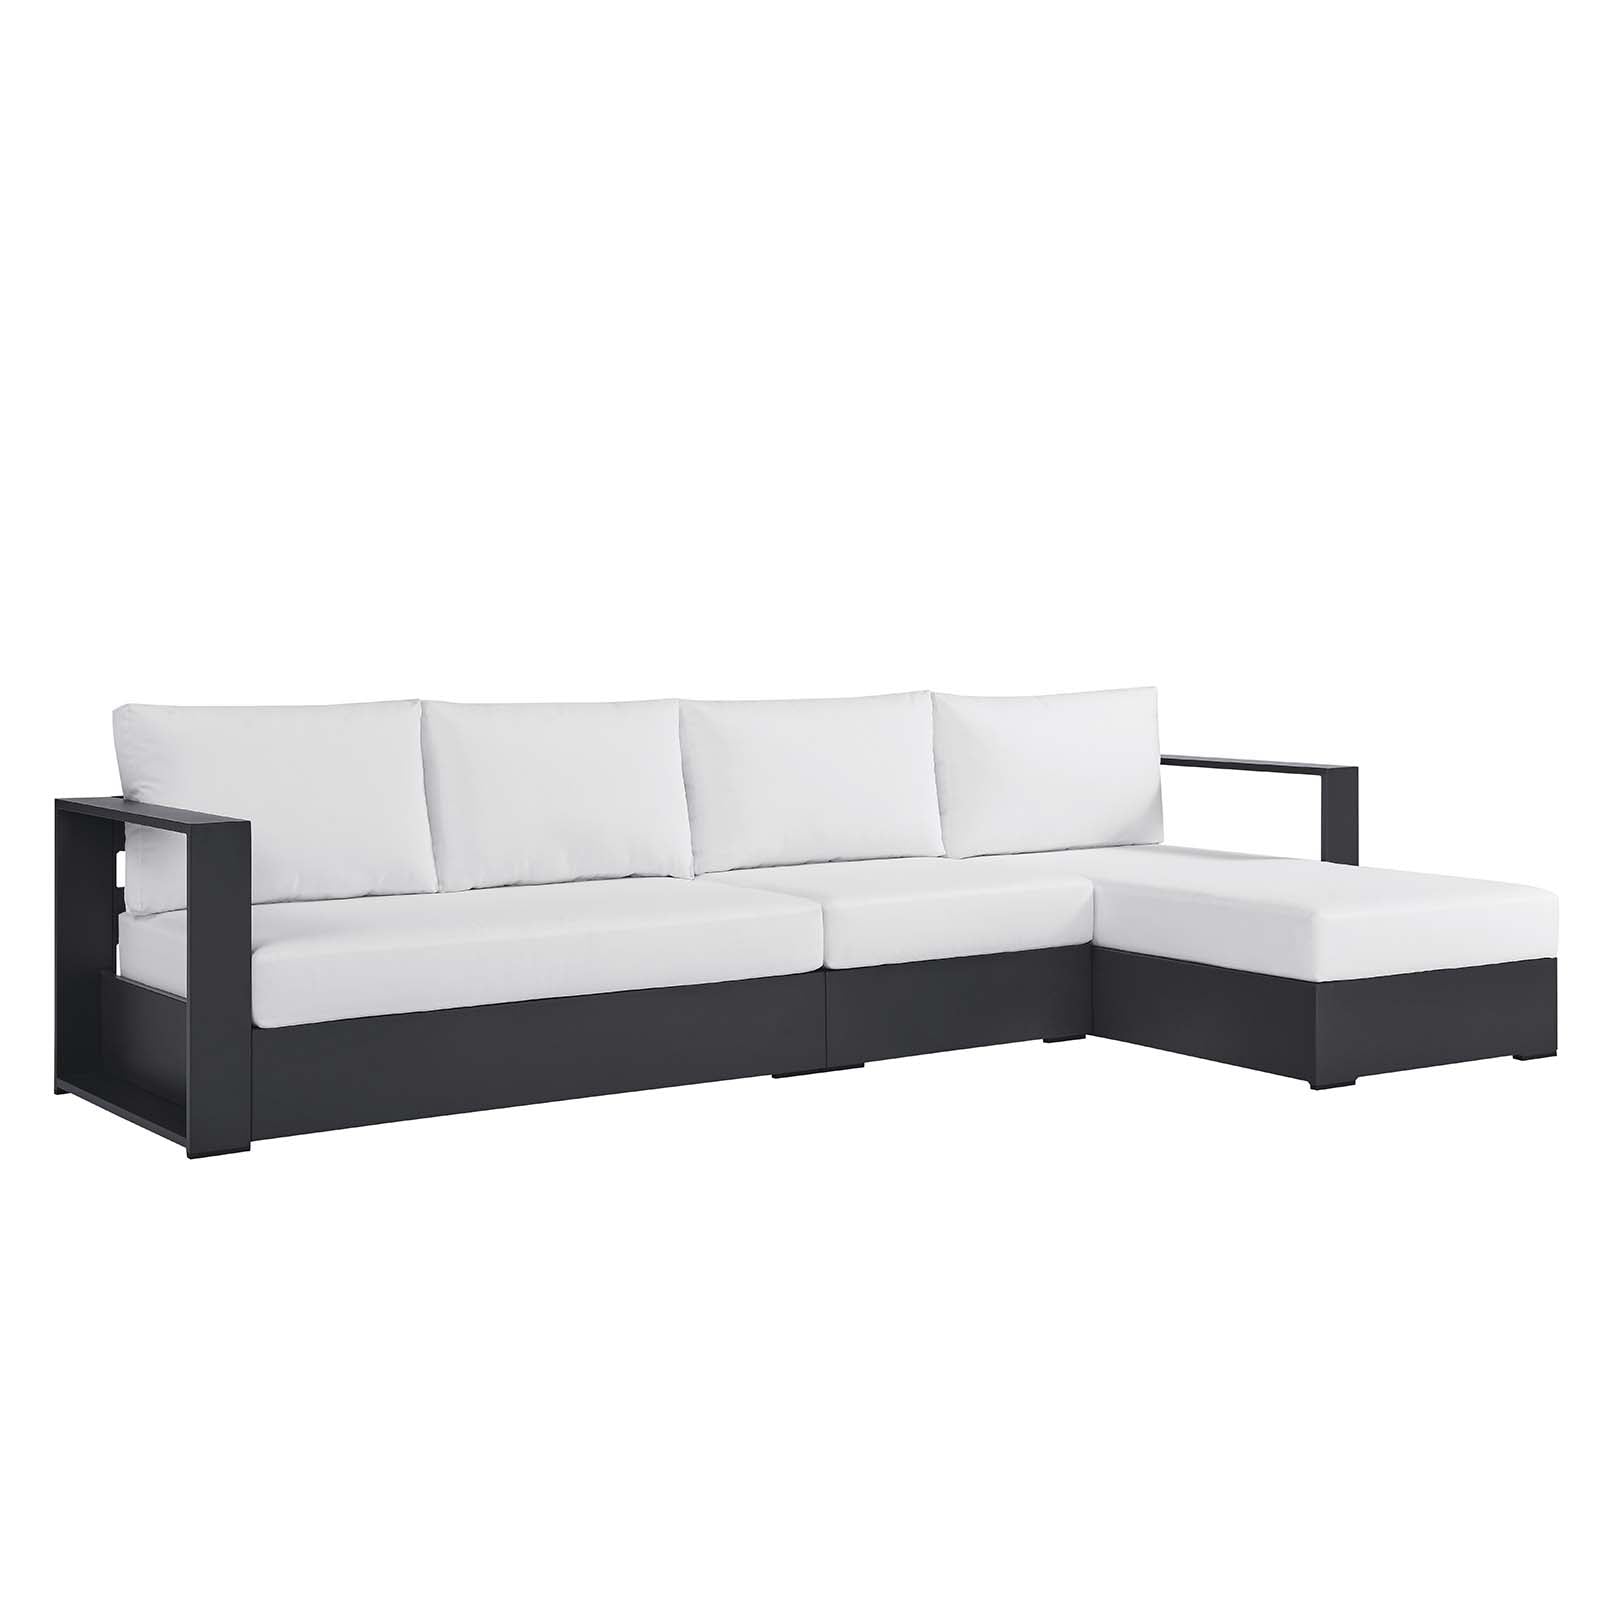 Tahoe Outdoor Patio Powder-Coated Aluminum 3-Piece Right-Facing Chaise Sectional Sofa Set - East Shore Modern Home Furnishings